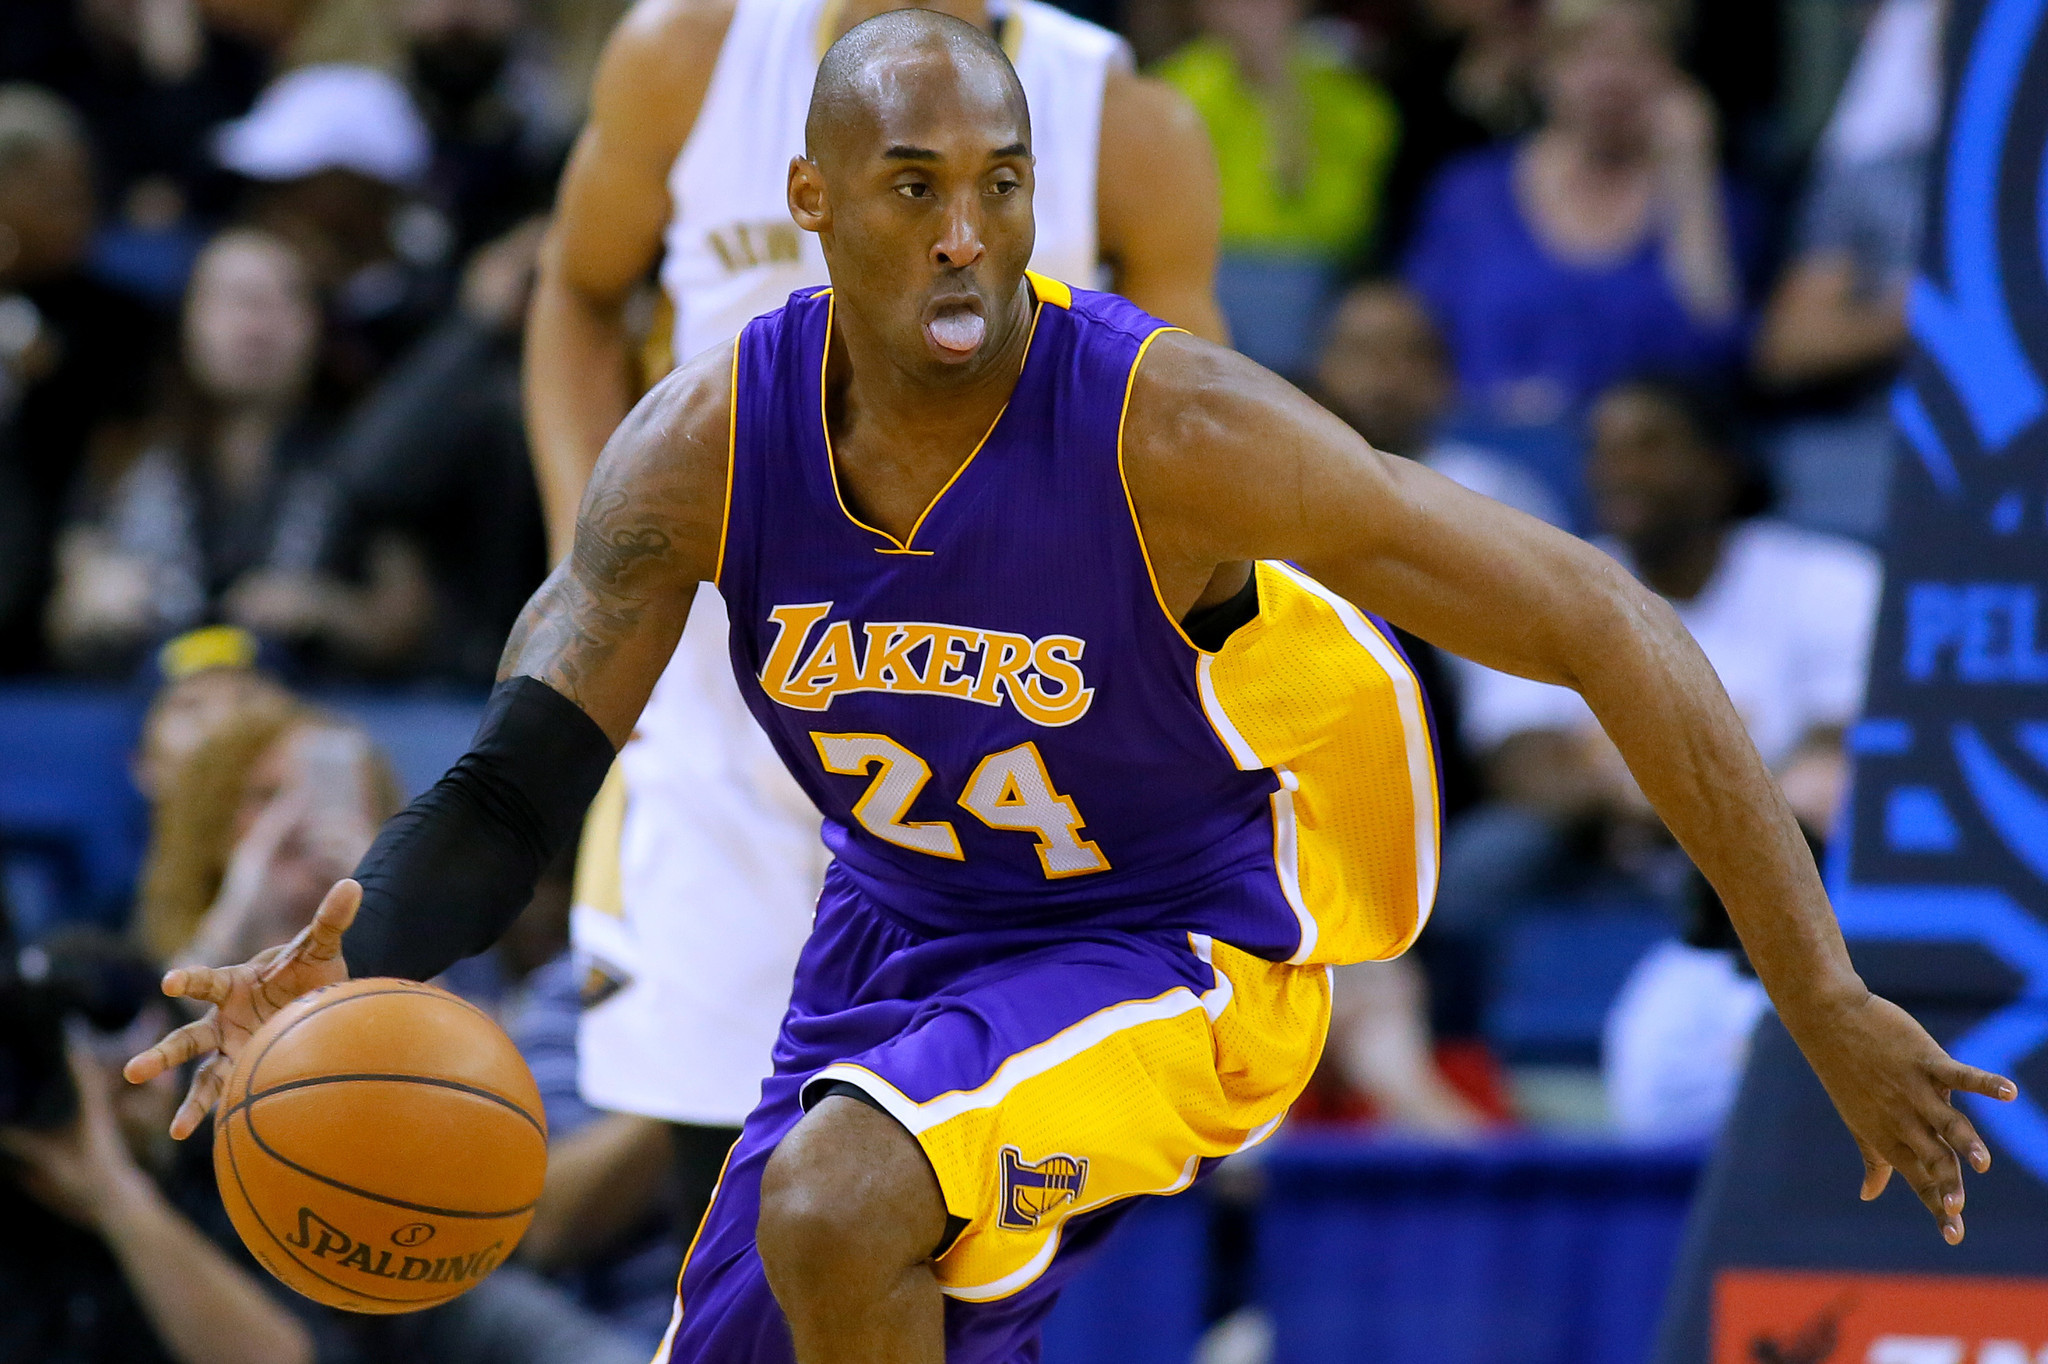 What position does Kobe Bryant play?